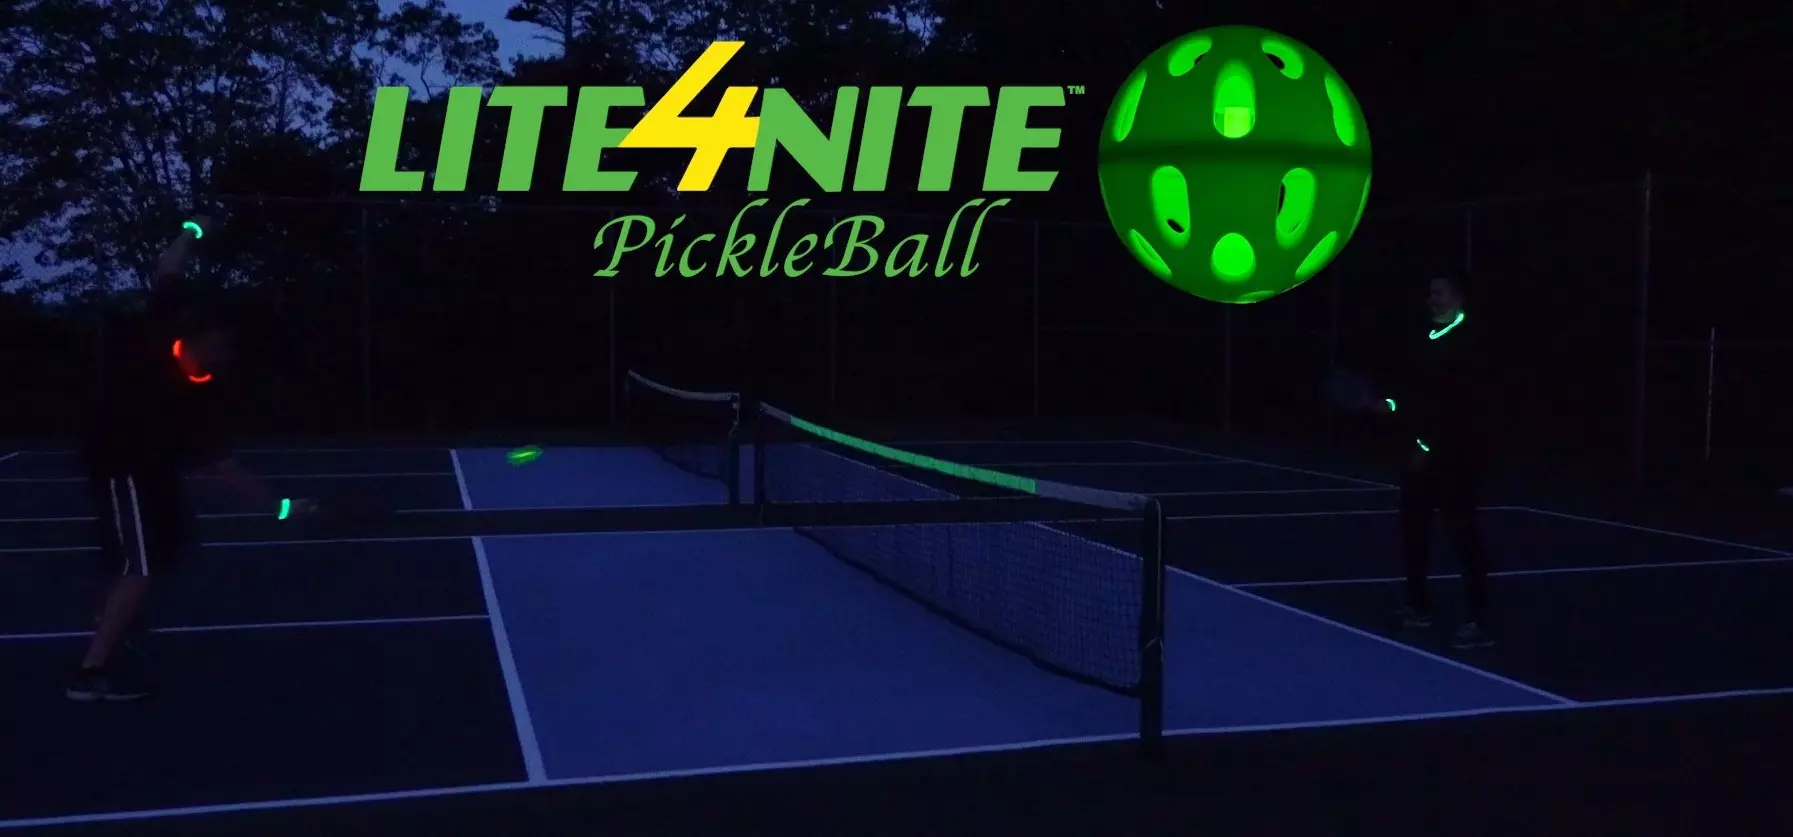 A New Hampshire Man Just Invented a Glow-in-the-Dark Pickleball